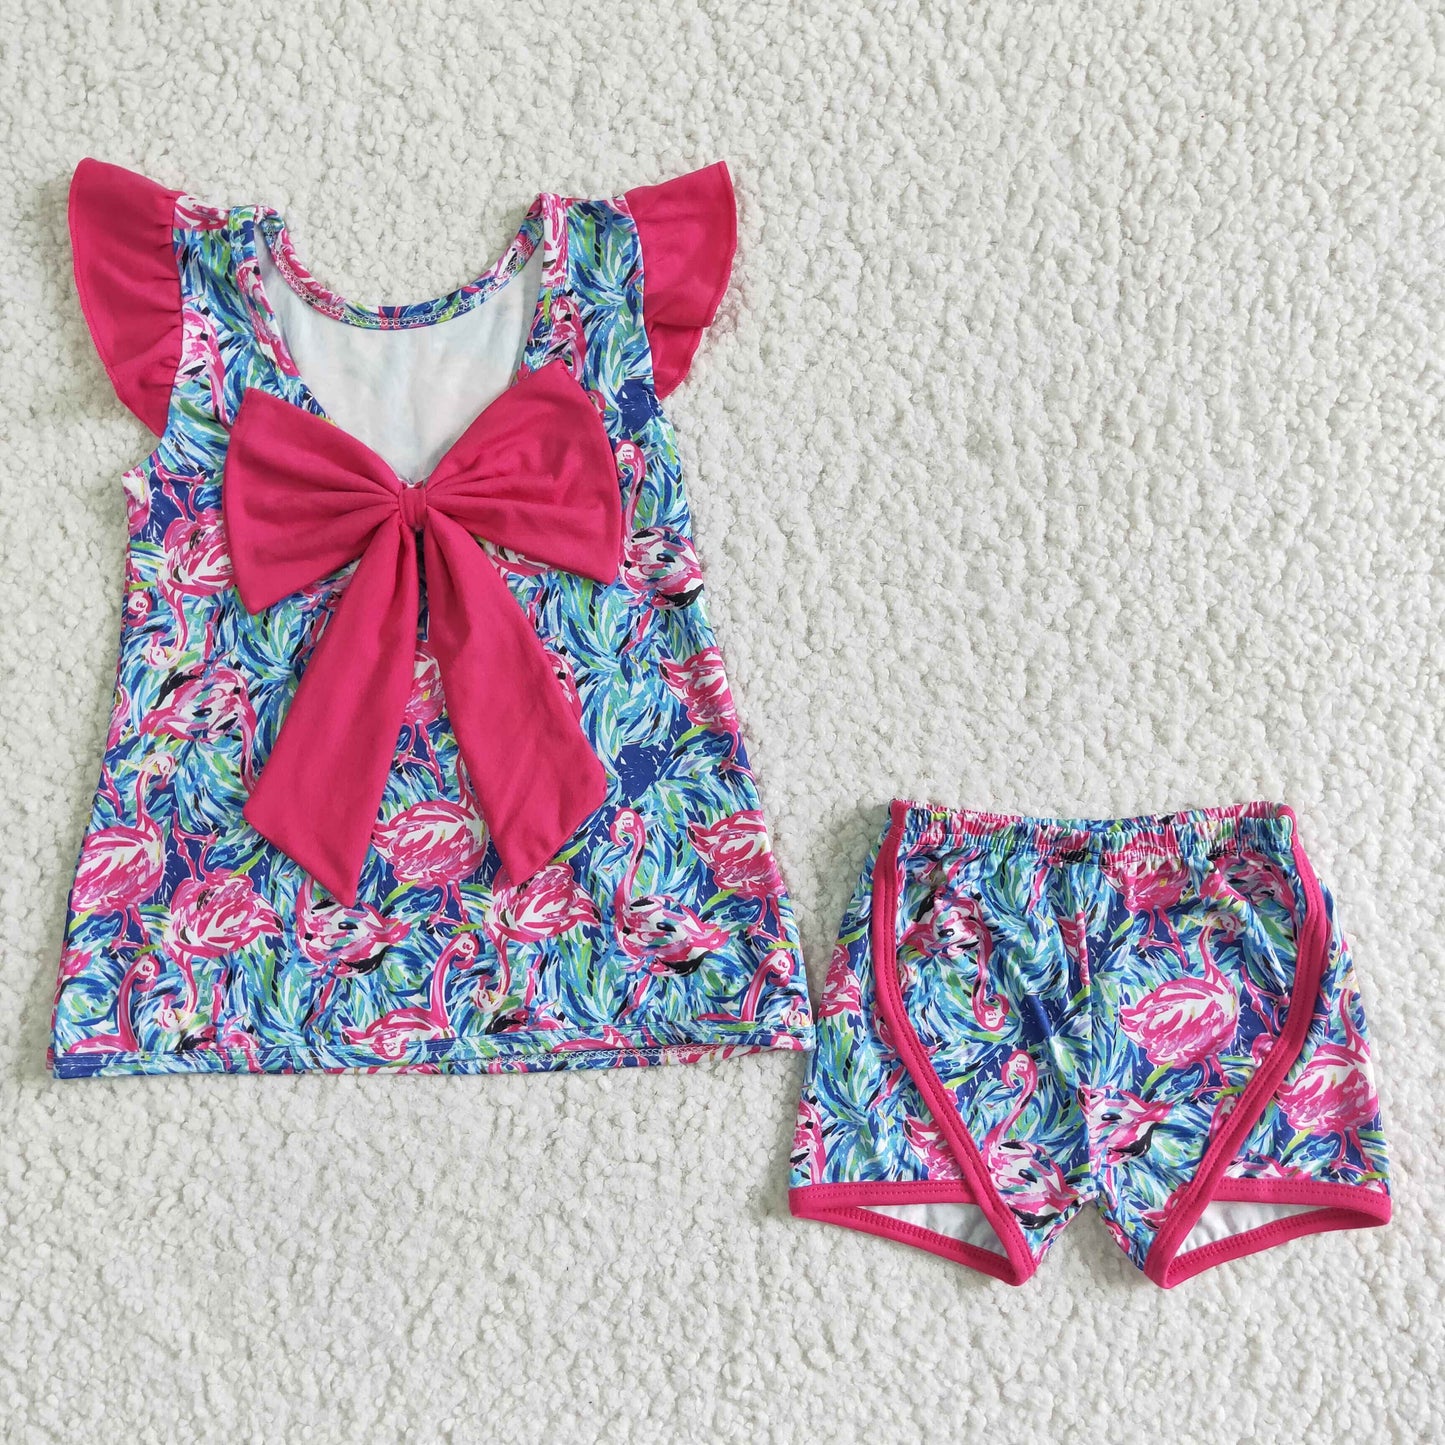 Infant baby girls summer outfit